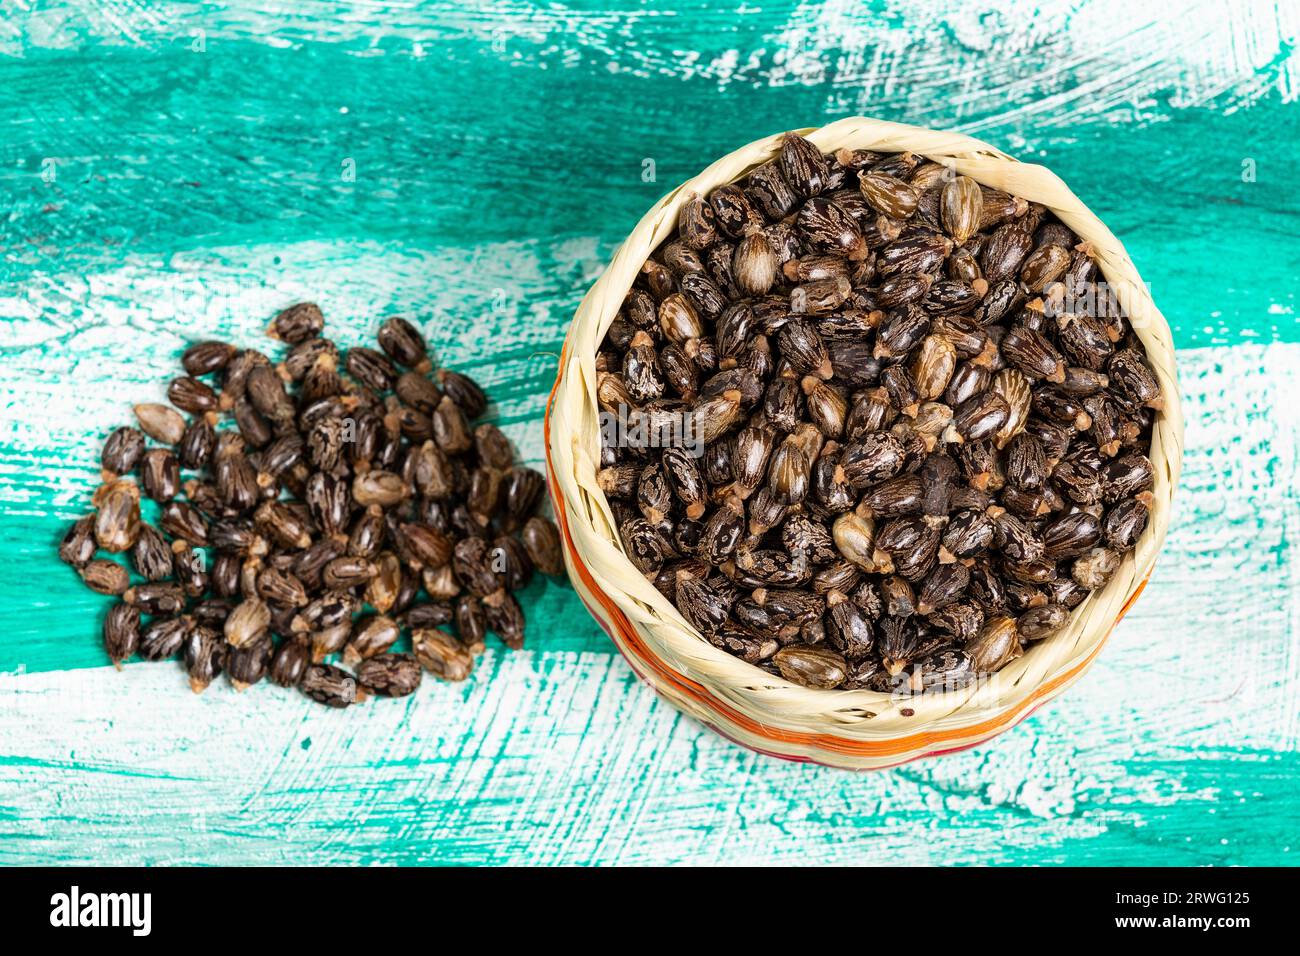 Ricinus Communis – Dried Seeds Of The Fruit Of The Castor Bean Plant. Stock Photo